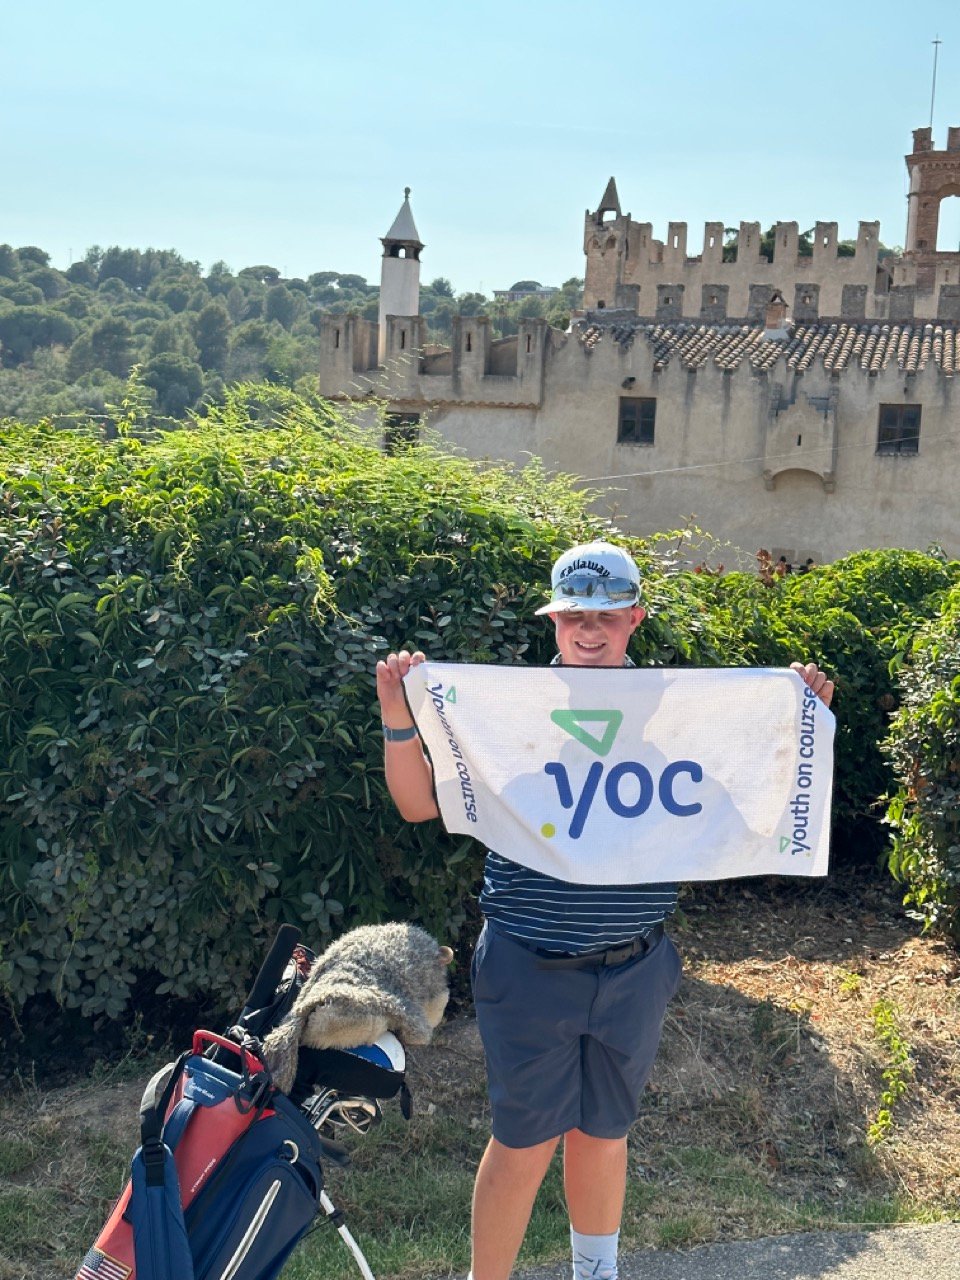 Youth on Course member Ely Ziemer in Europe